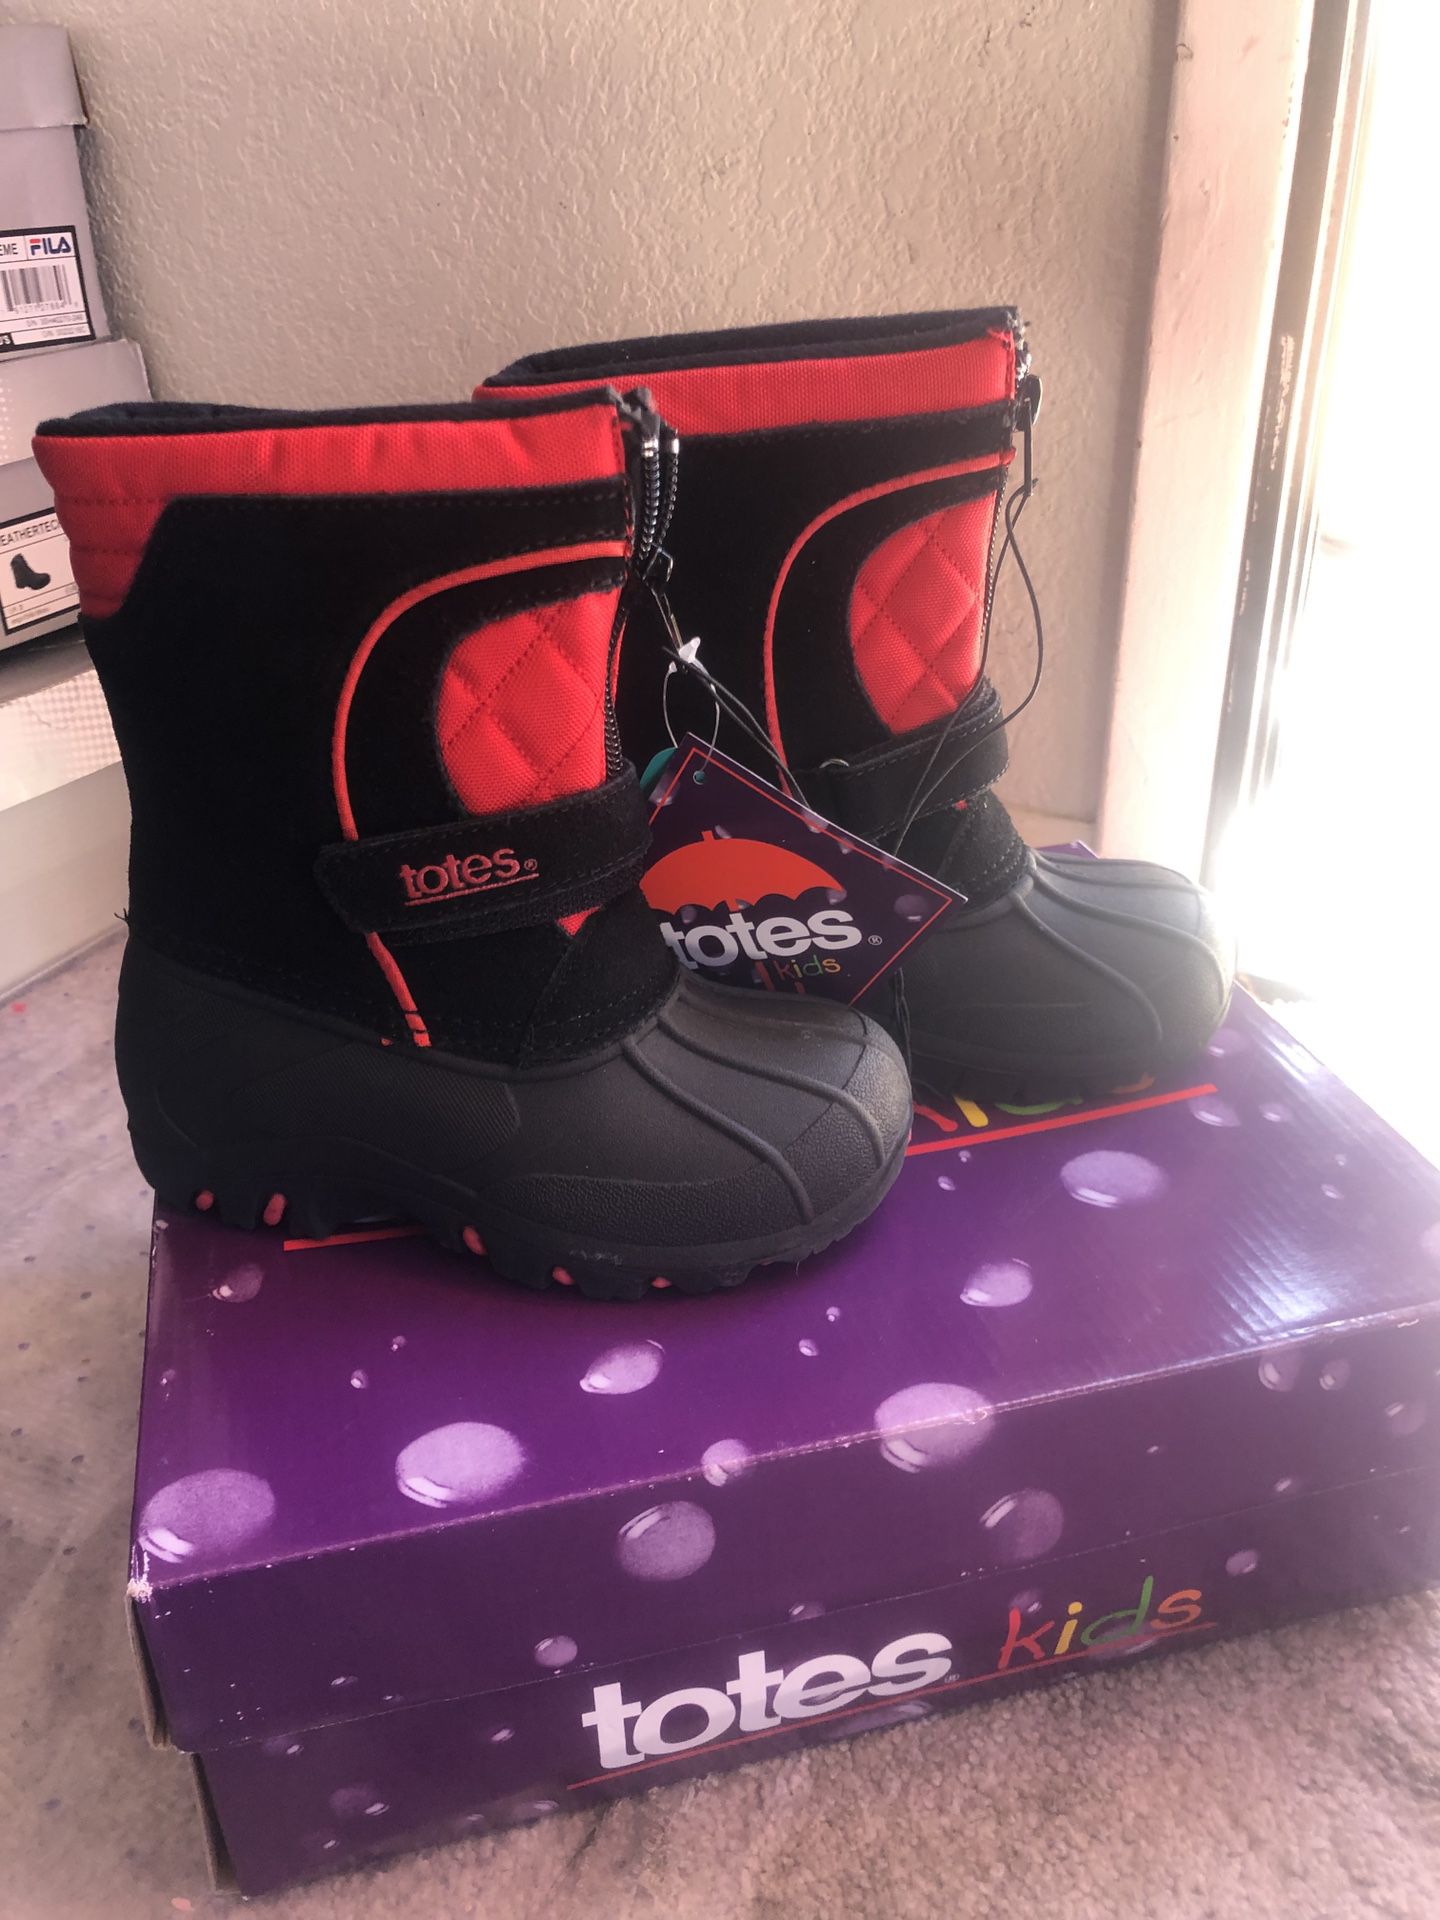 New toddler snow boots size 9